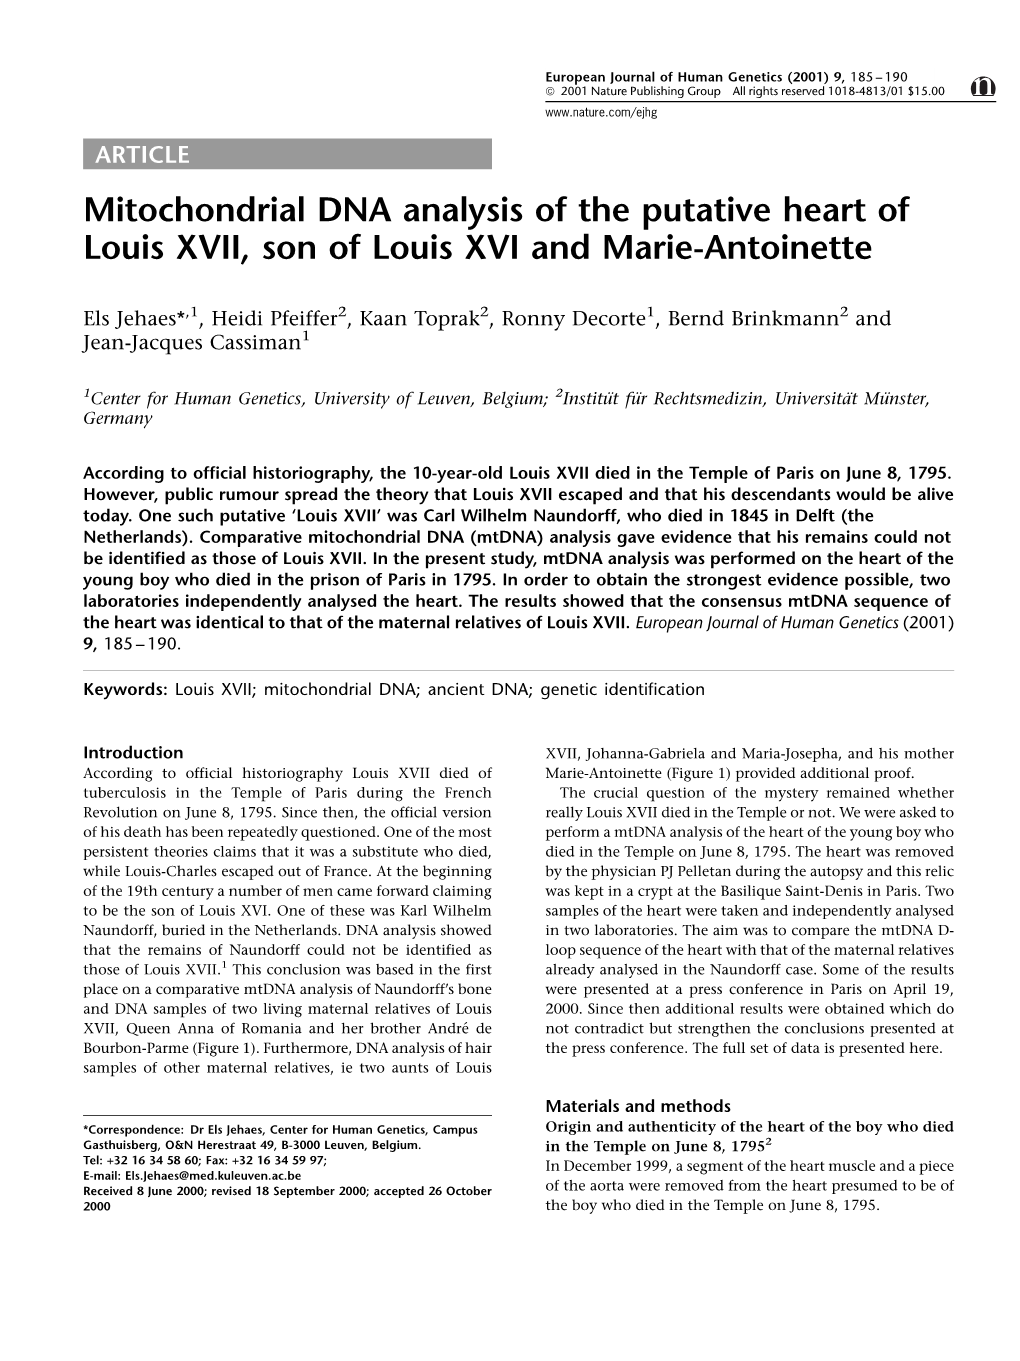 Mitochondrial DNA Analysis of the Putative Heart of Louis XVII, Son of Louis XVI and Marie-Antoinette